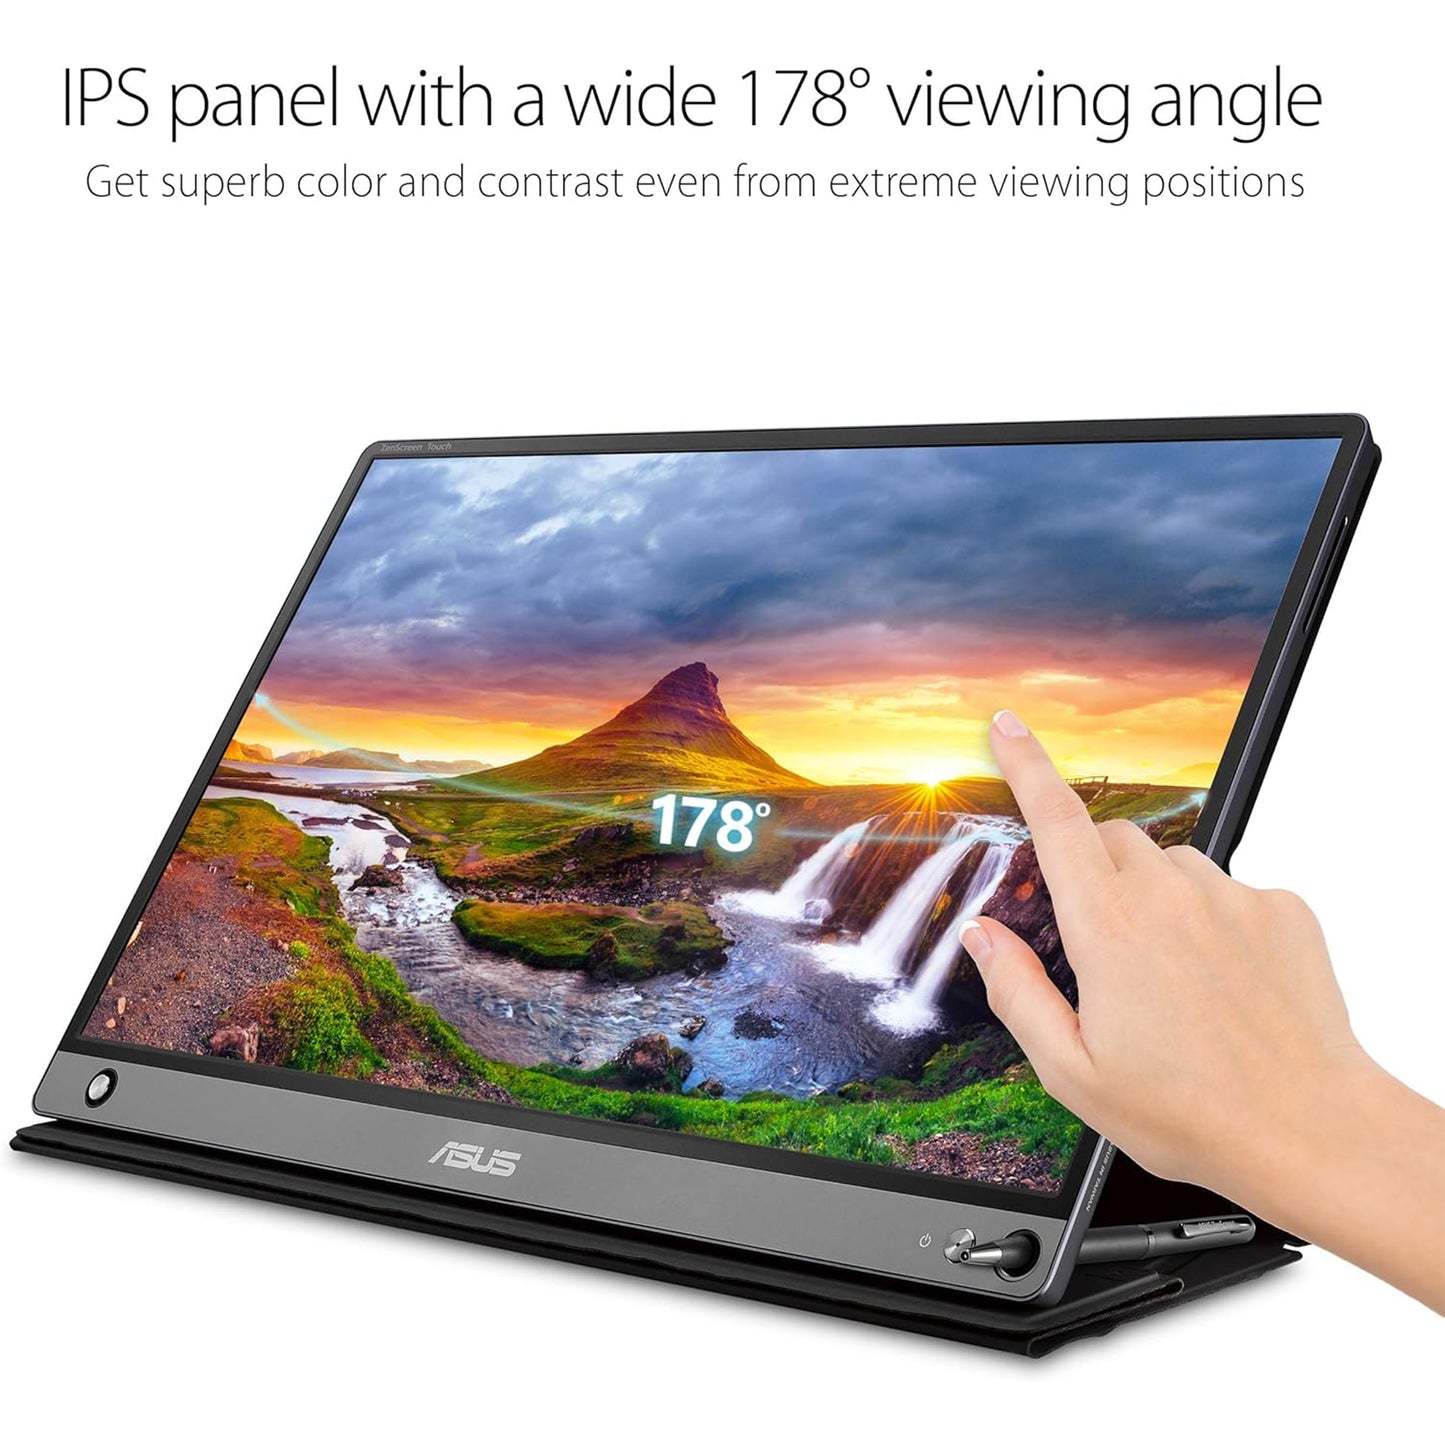 ASUS ZenScreen Touch Screen 15.6” 1080P Portable USB (MB16AMT) - Full HD (1920 x 1080), IPS, Anti-glare, Built-in Battery, Speakers, Eye Care, USB Type-C, Micro HDMI, Smart Case